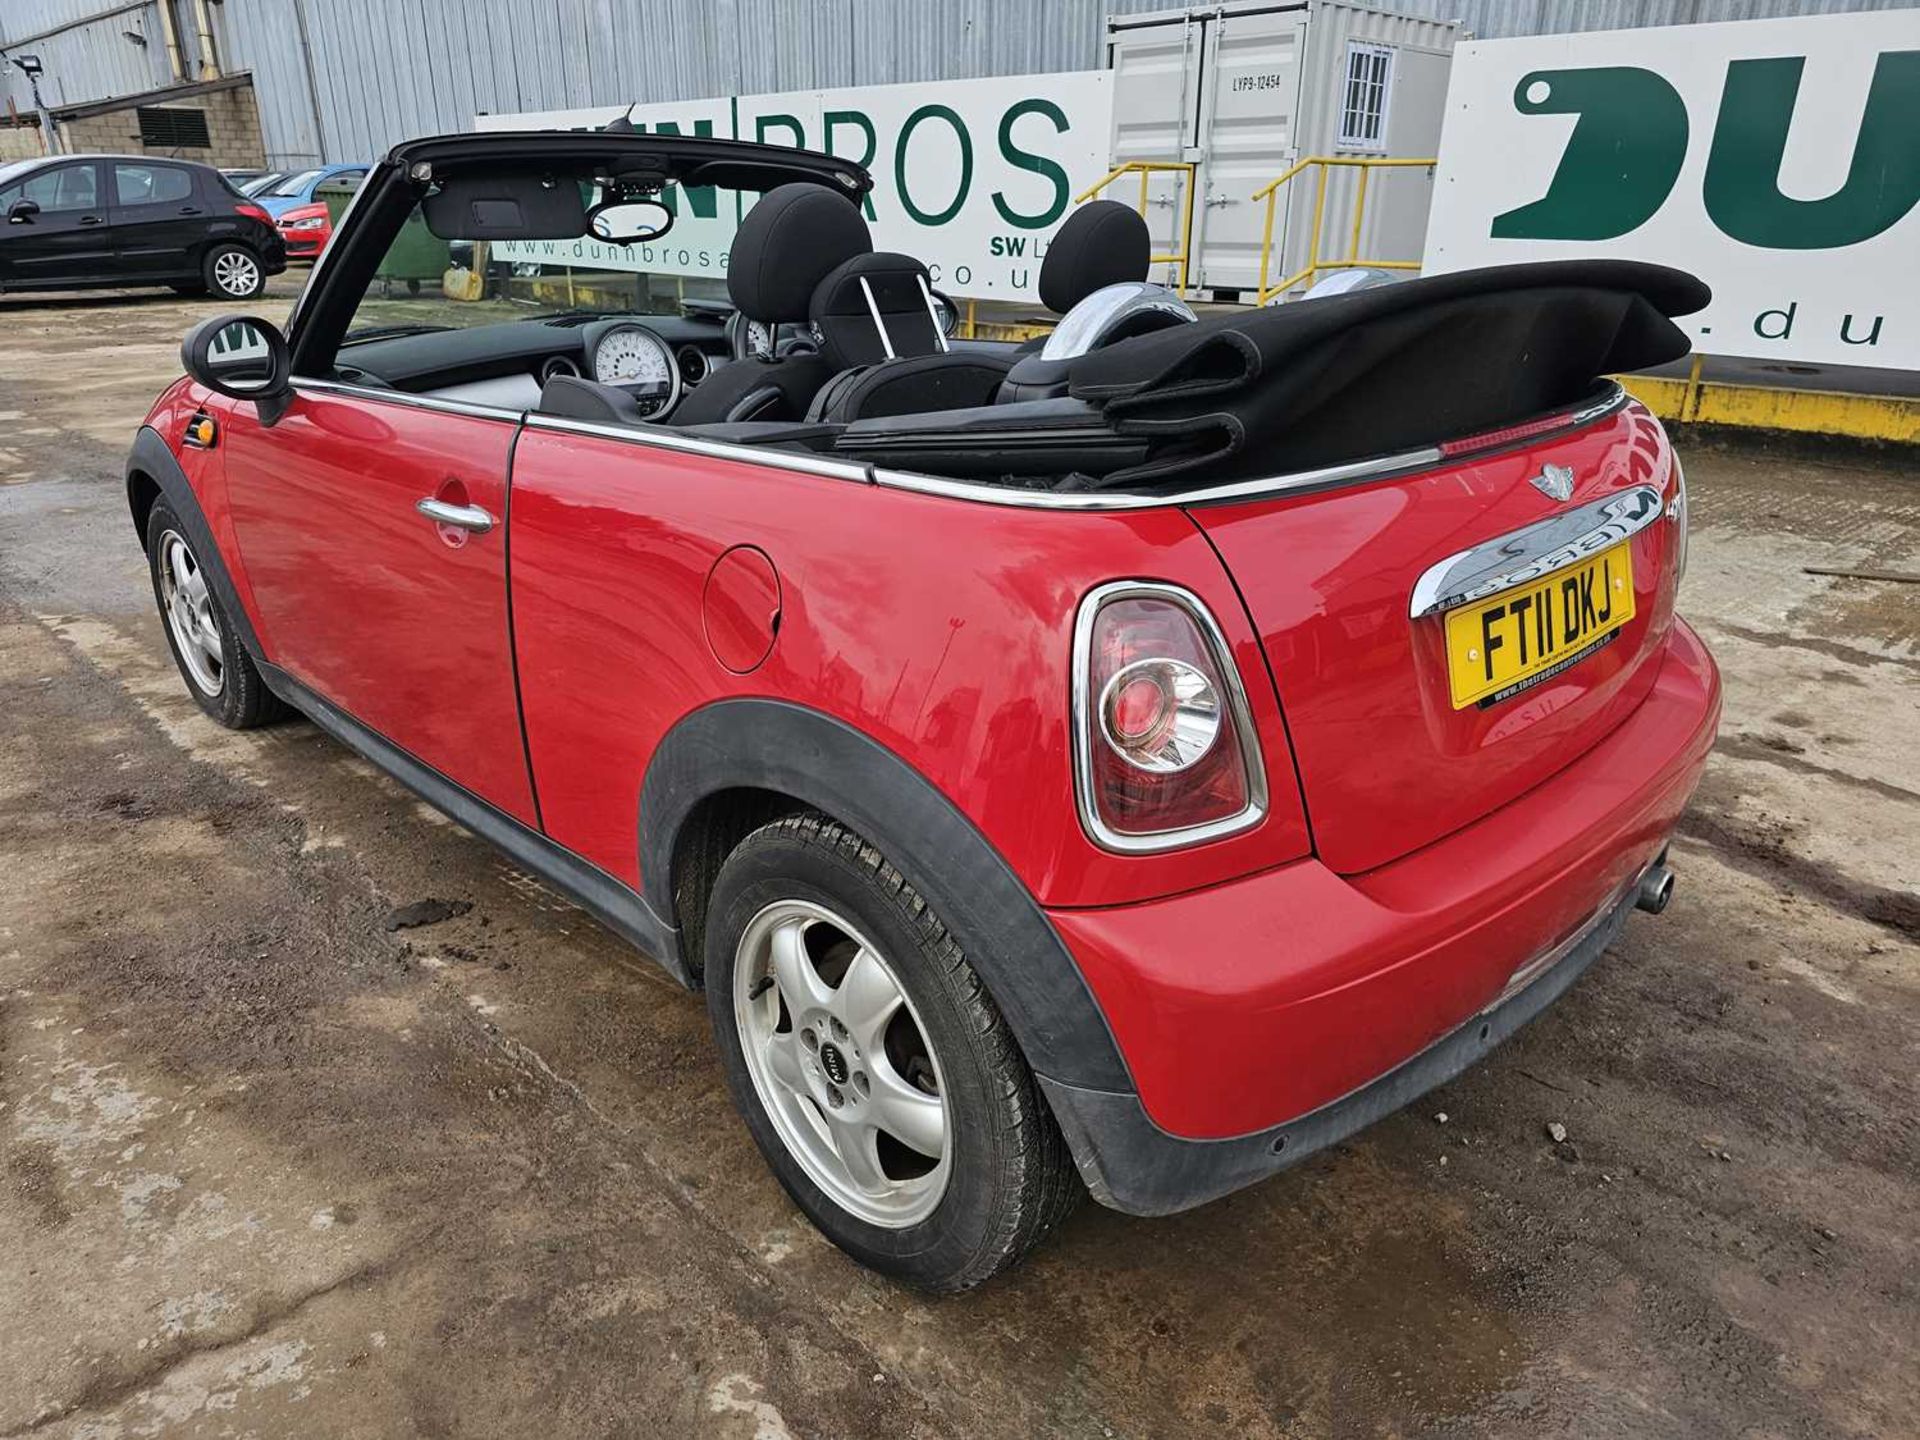 2011 Mini One Convertible, 6 Speed, Bluetooth, Cruise Control, A/C (Reg. Docs. Available) - Image 4 of 25